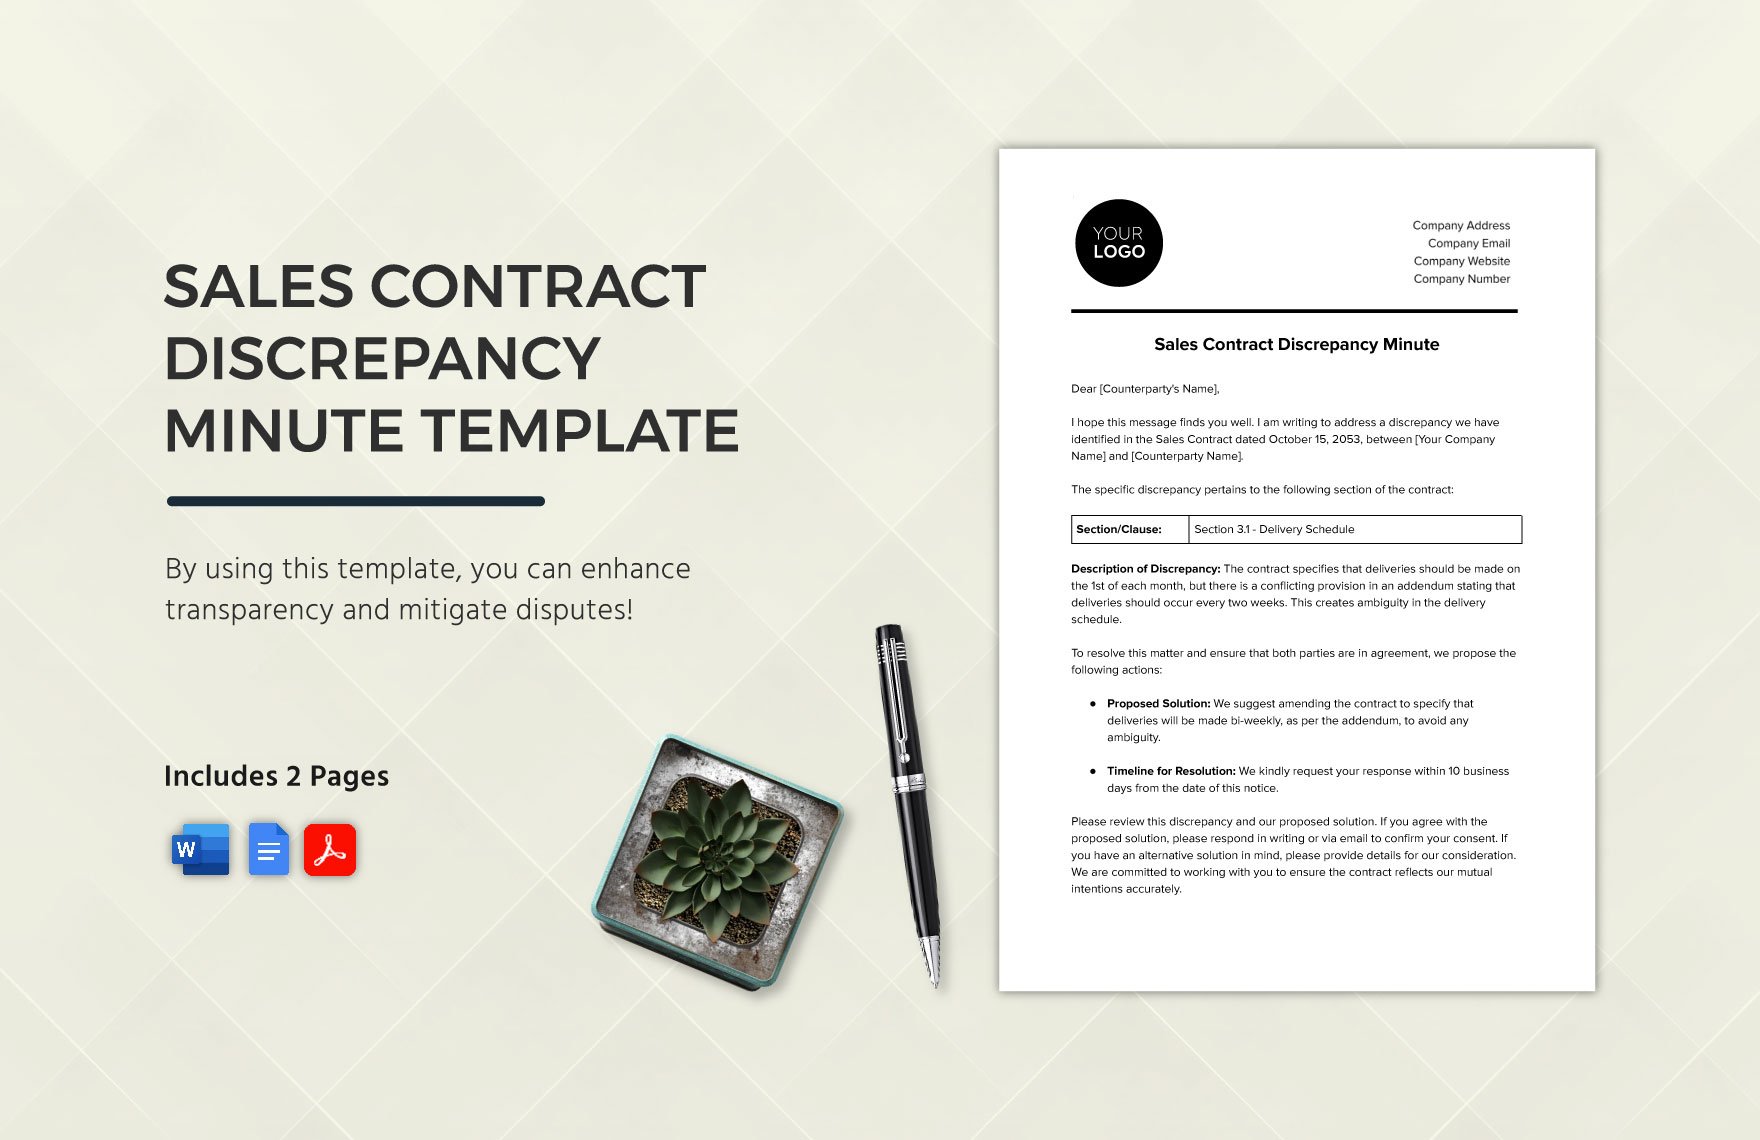 Sales Contract Discrepancy Minute Template